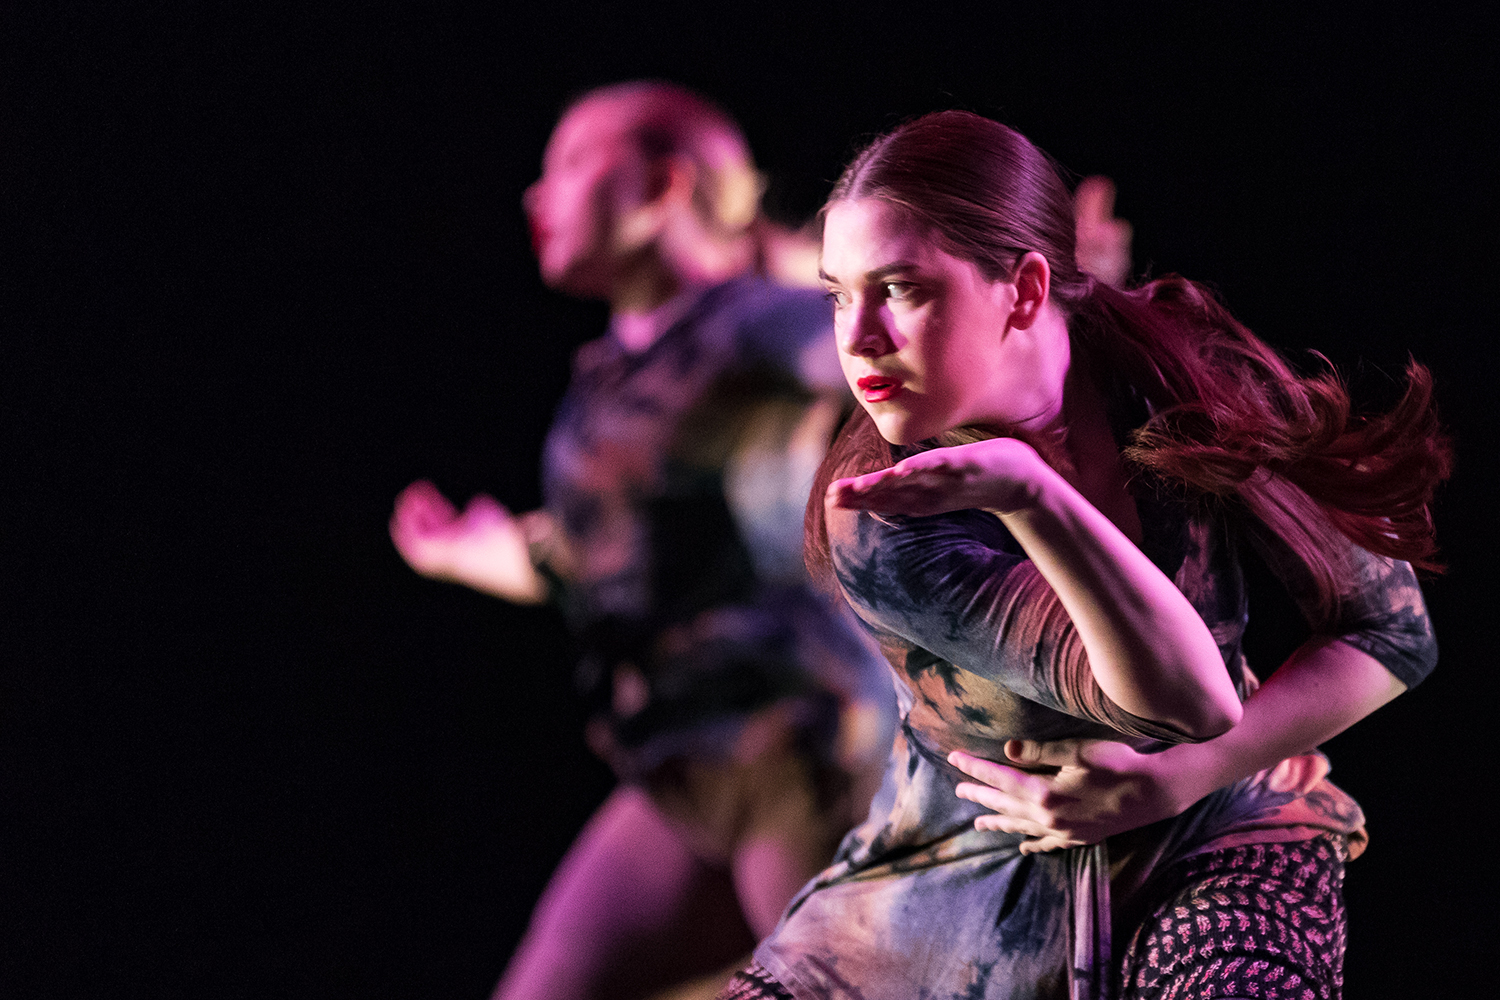  Students in the University of Iowa's Department of Dance perform in the Faculty/Graduate Concert in Space Place Theater on Tuesday, Feb 5., 2019.  